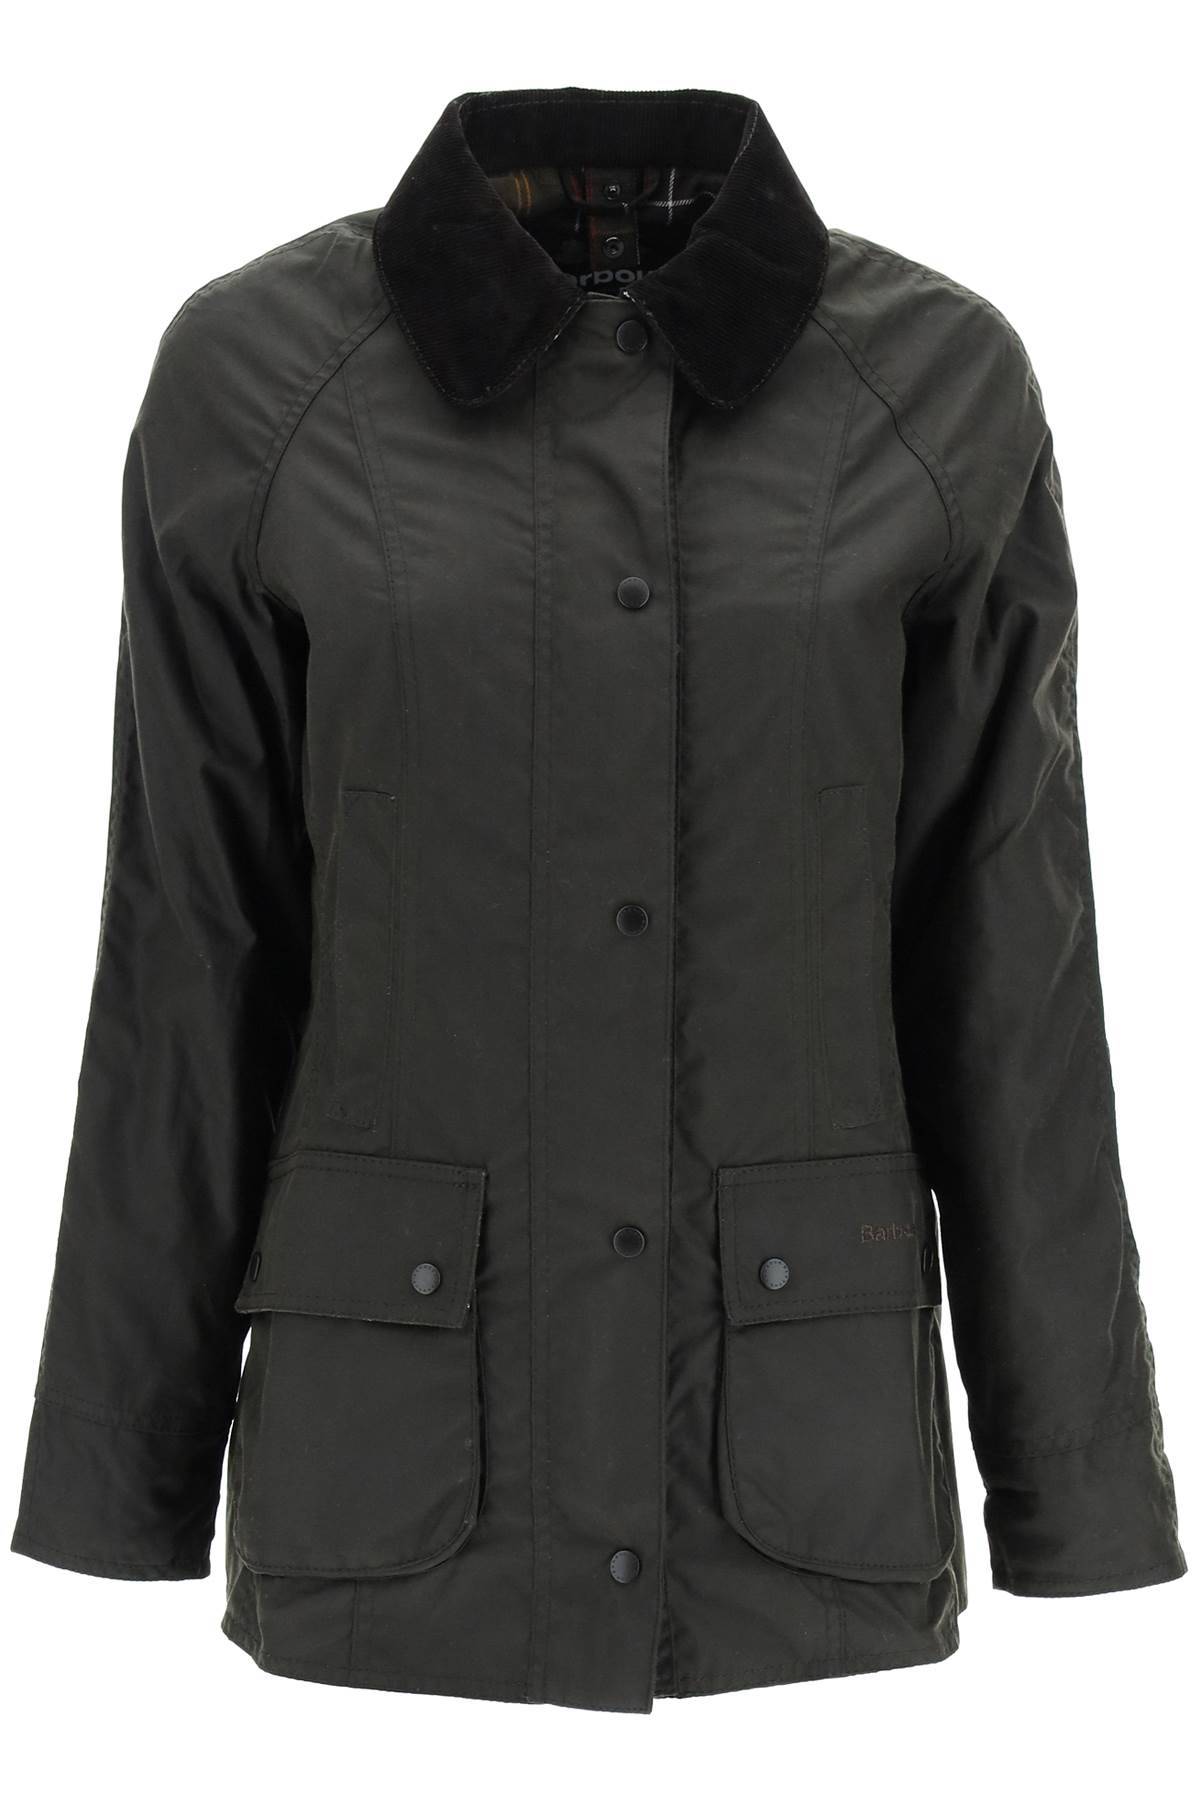 Barbour BARBOUR 'beadnell' wax jacket